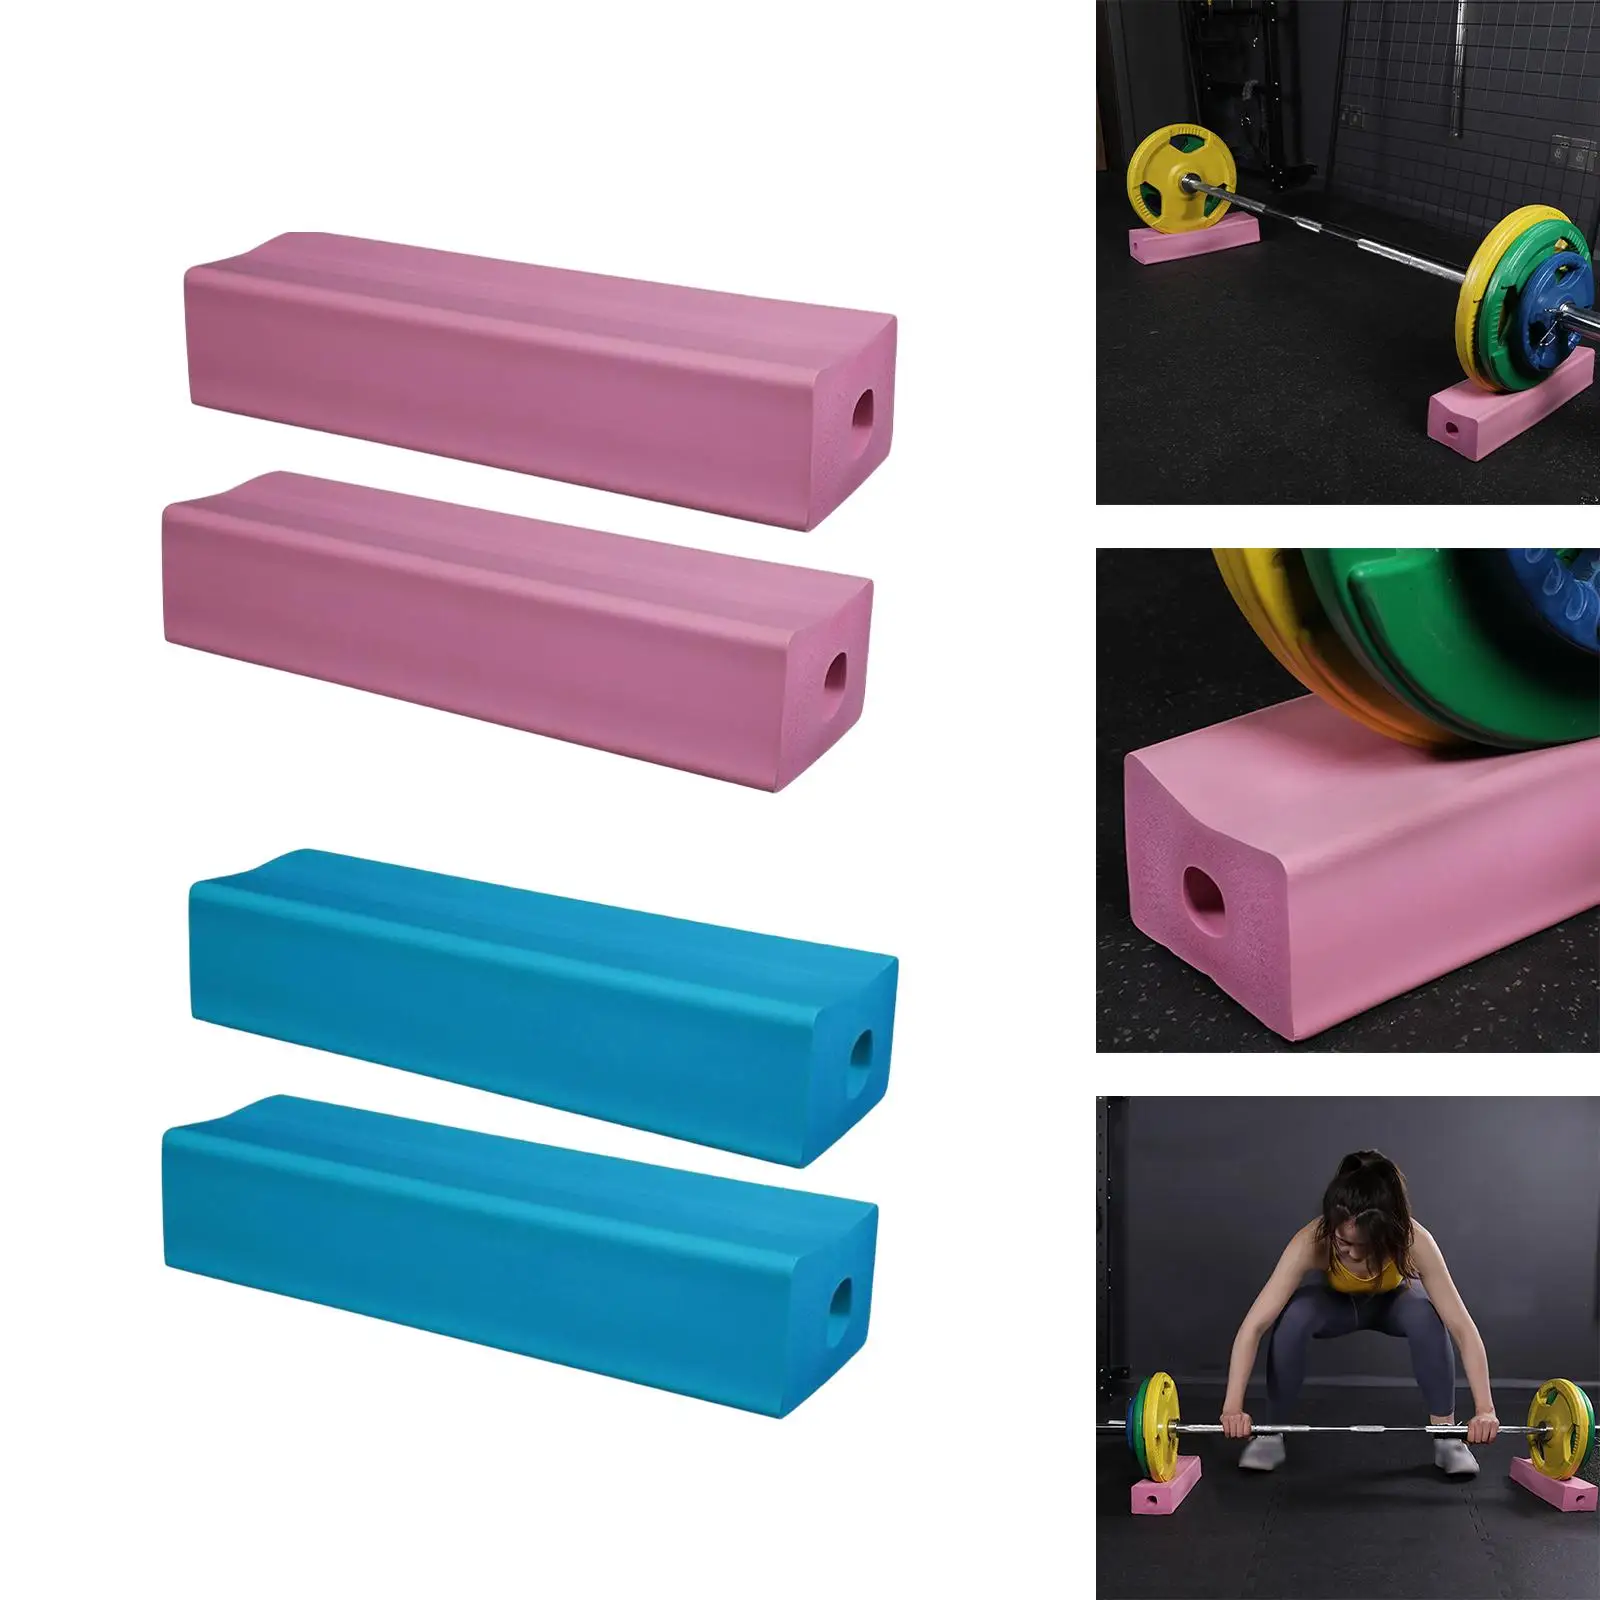 Fitness Barbell Pad Weight Lifting Drop Pads for Weight Training Barbell Plates Exercises